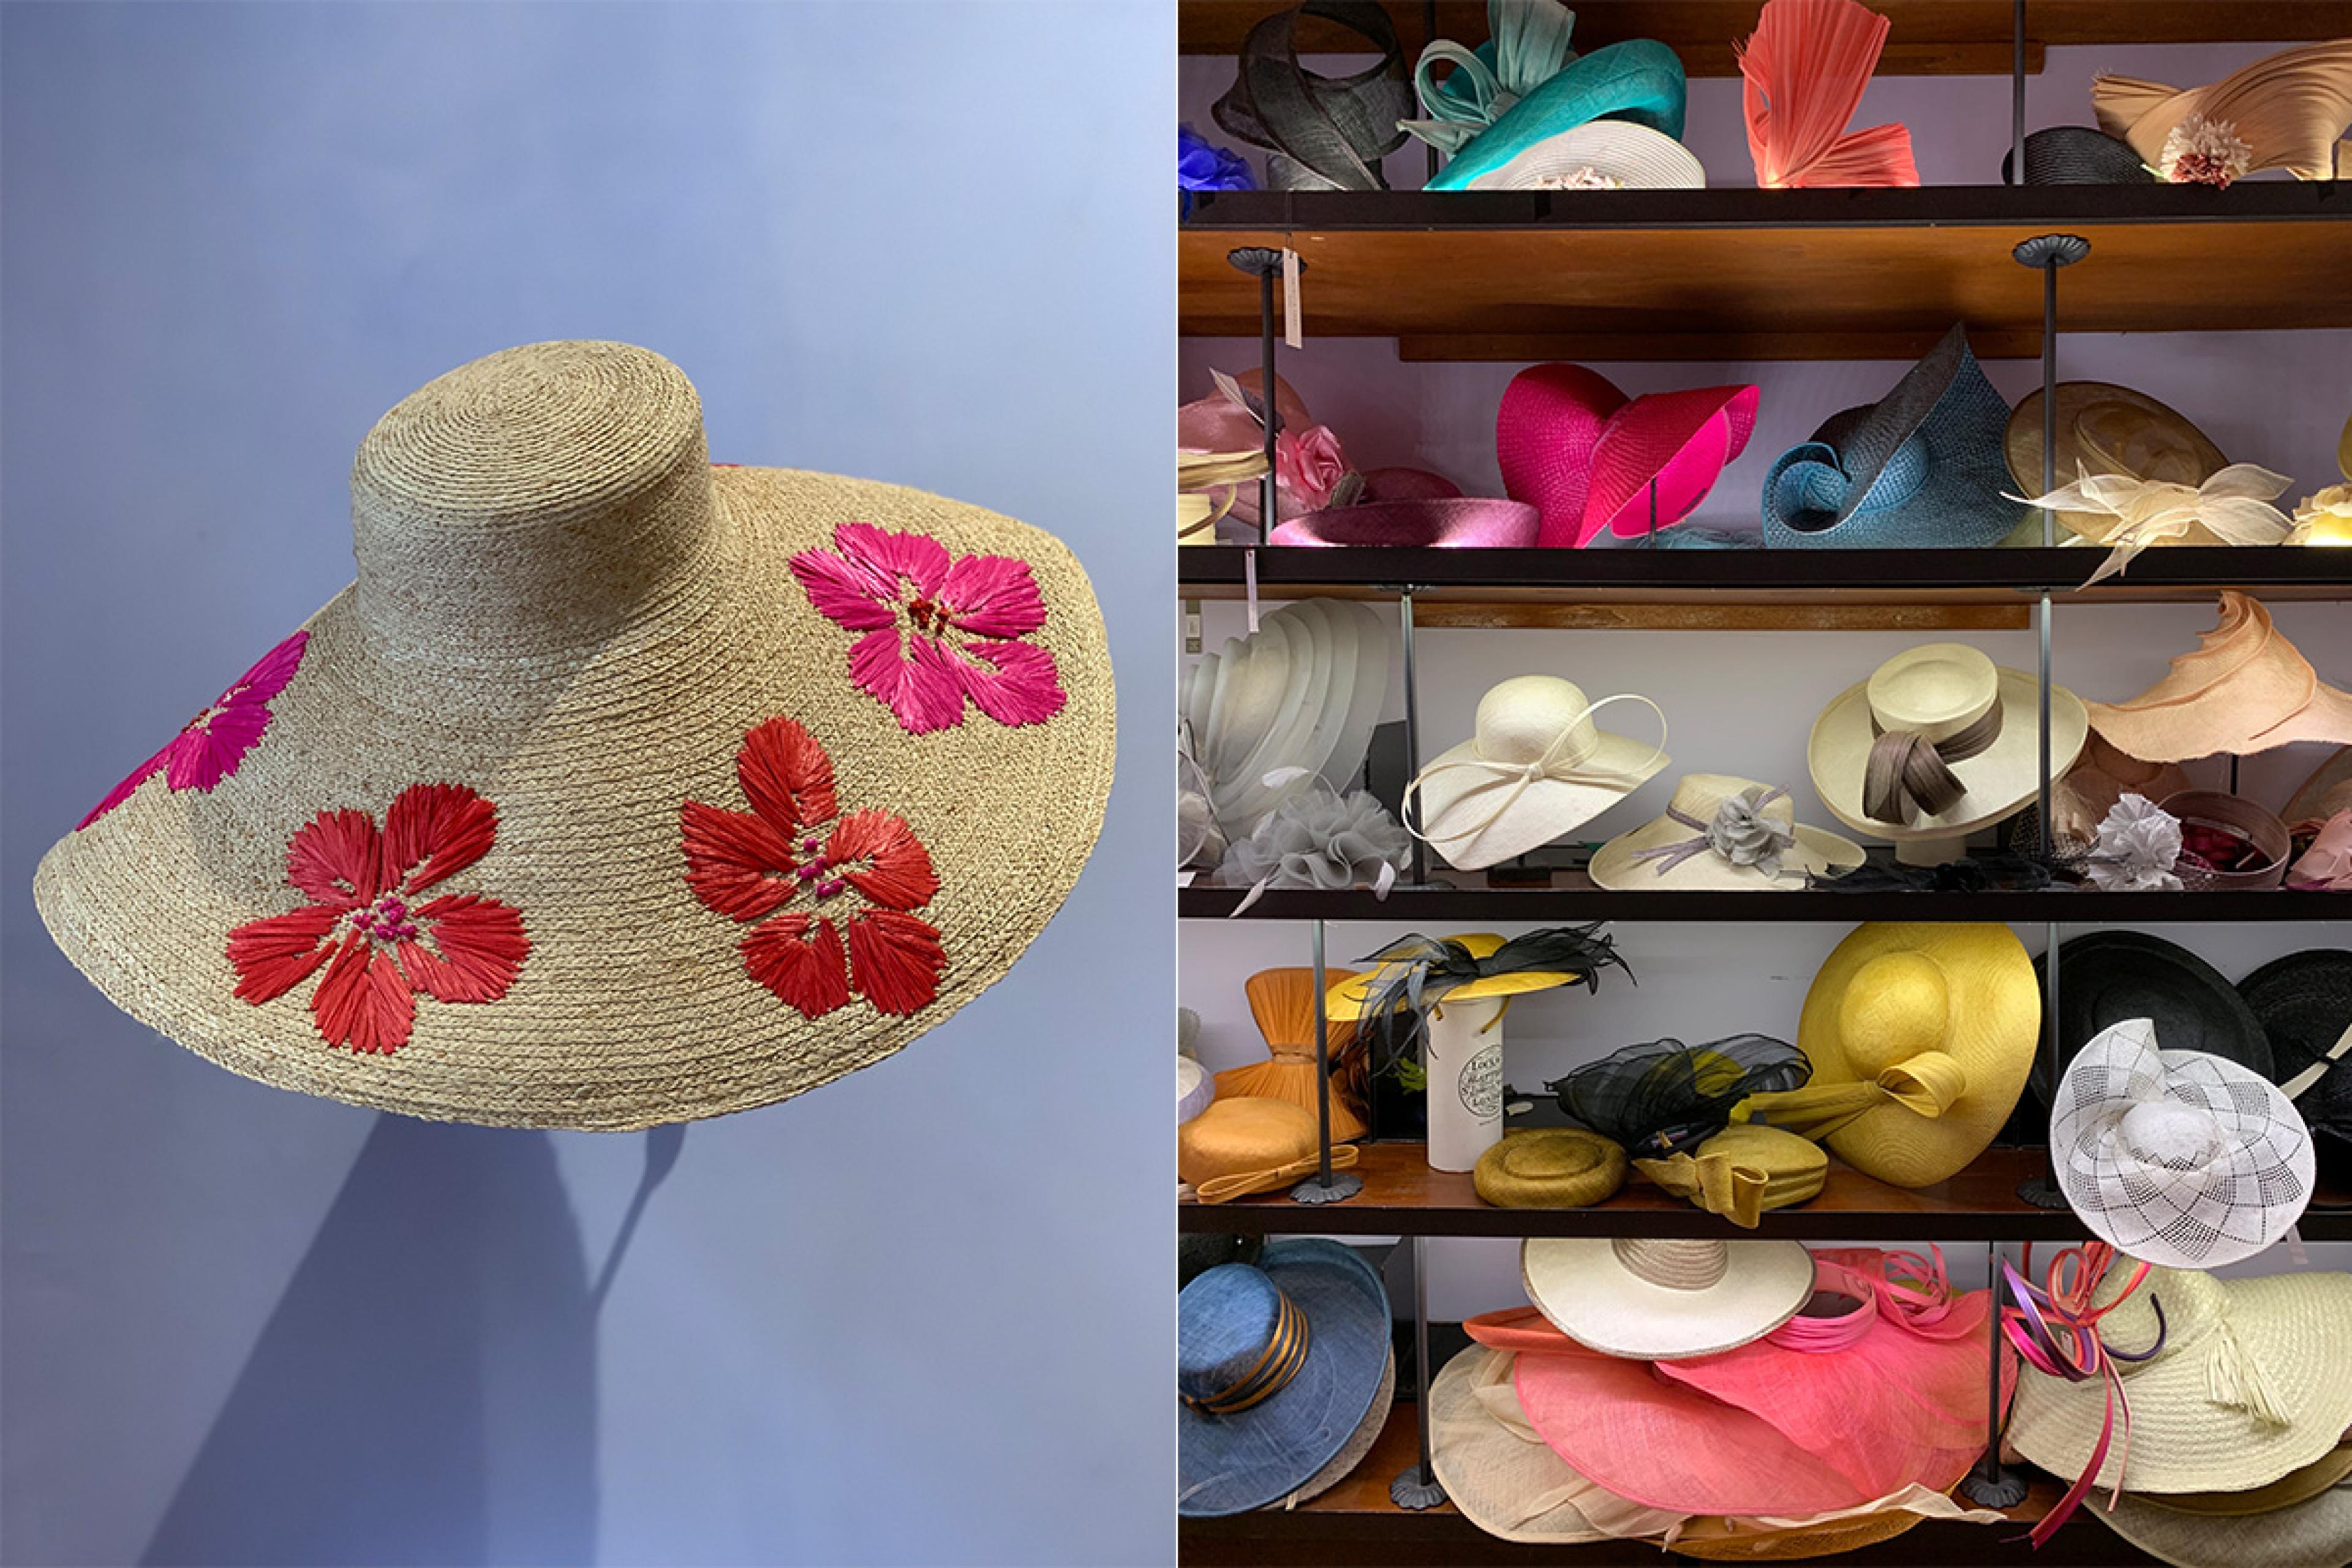 on left, a hat with flower details; on right, display shelves showing fashionable italian hats